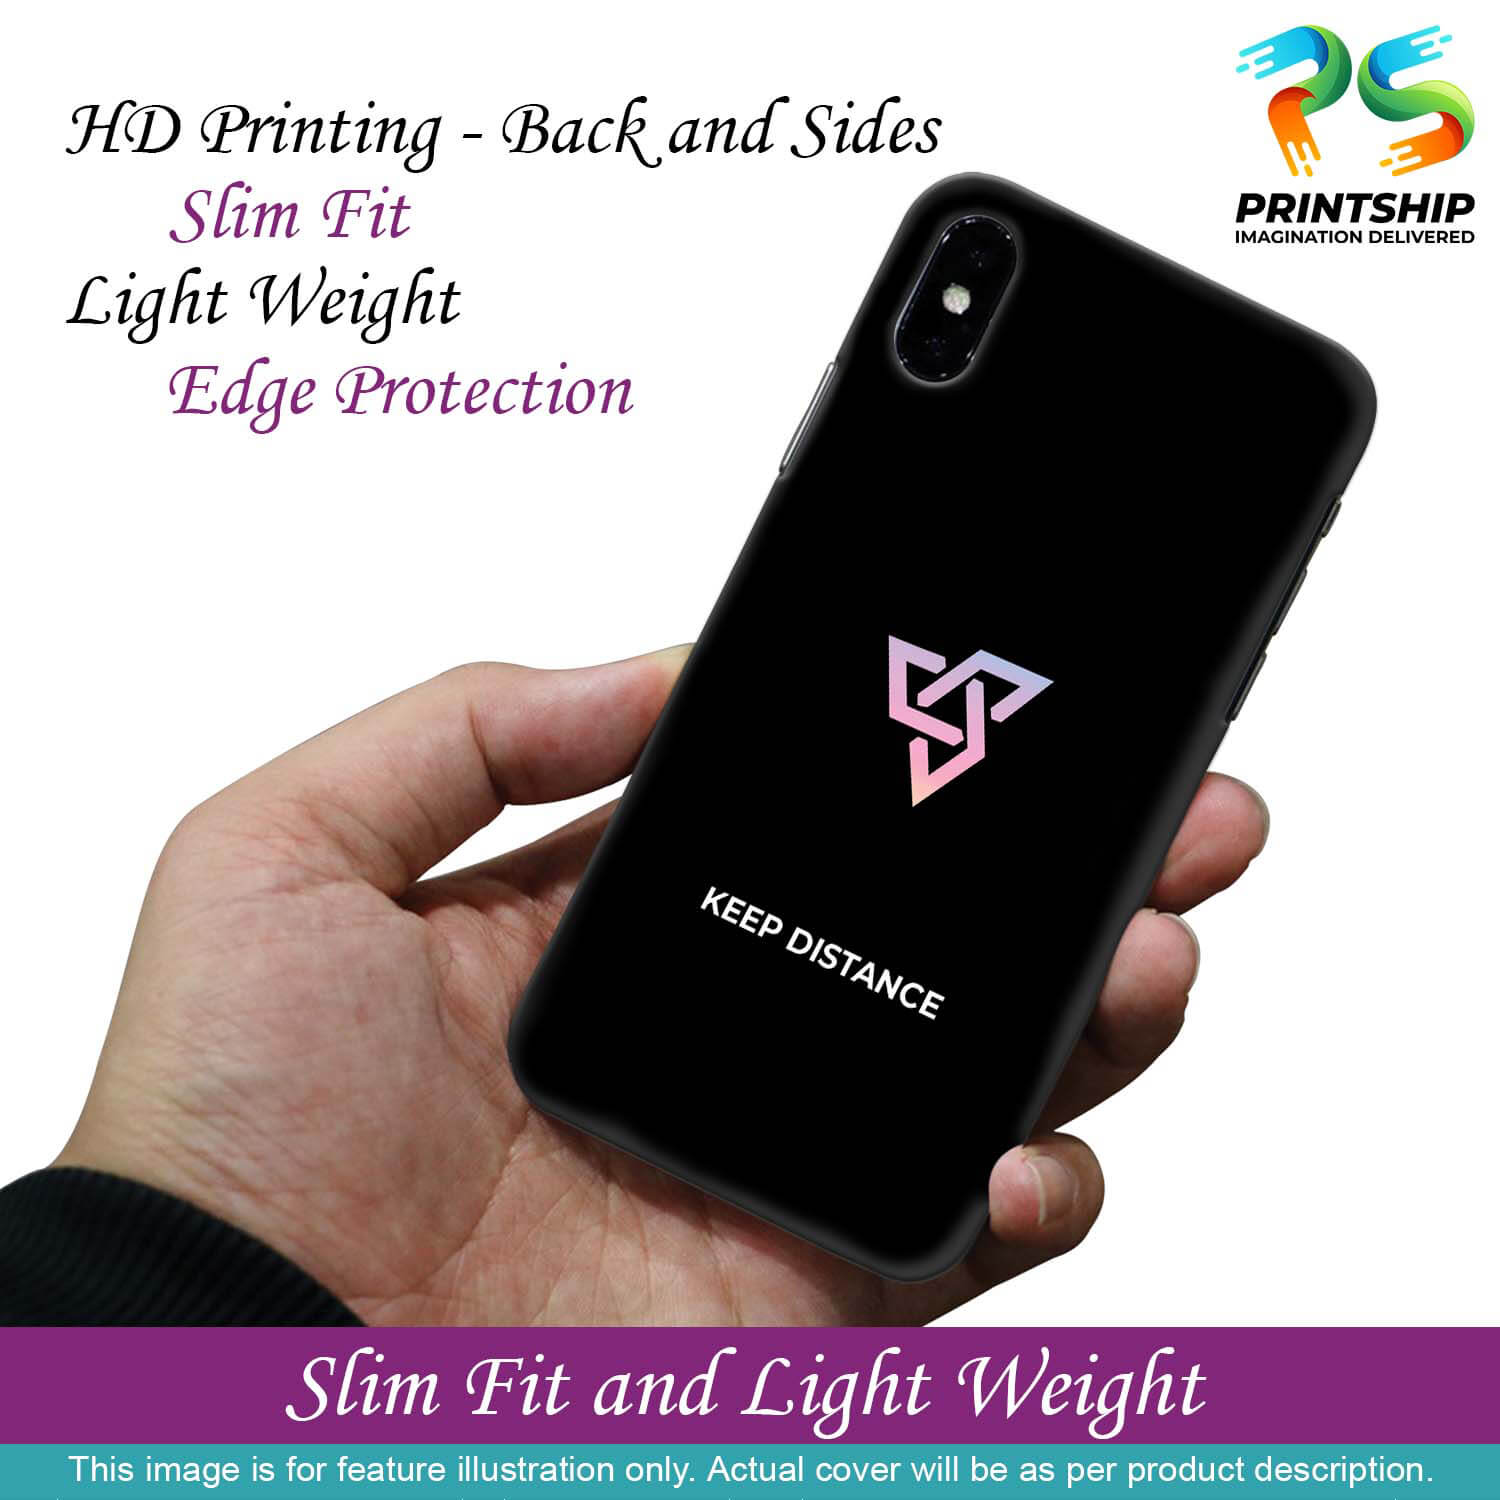 PS1334-Keep Distance Back Cover for Oppo K10